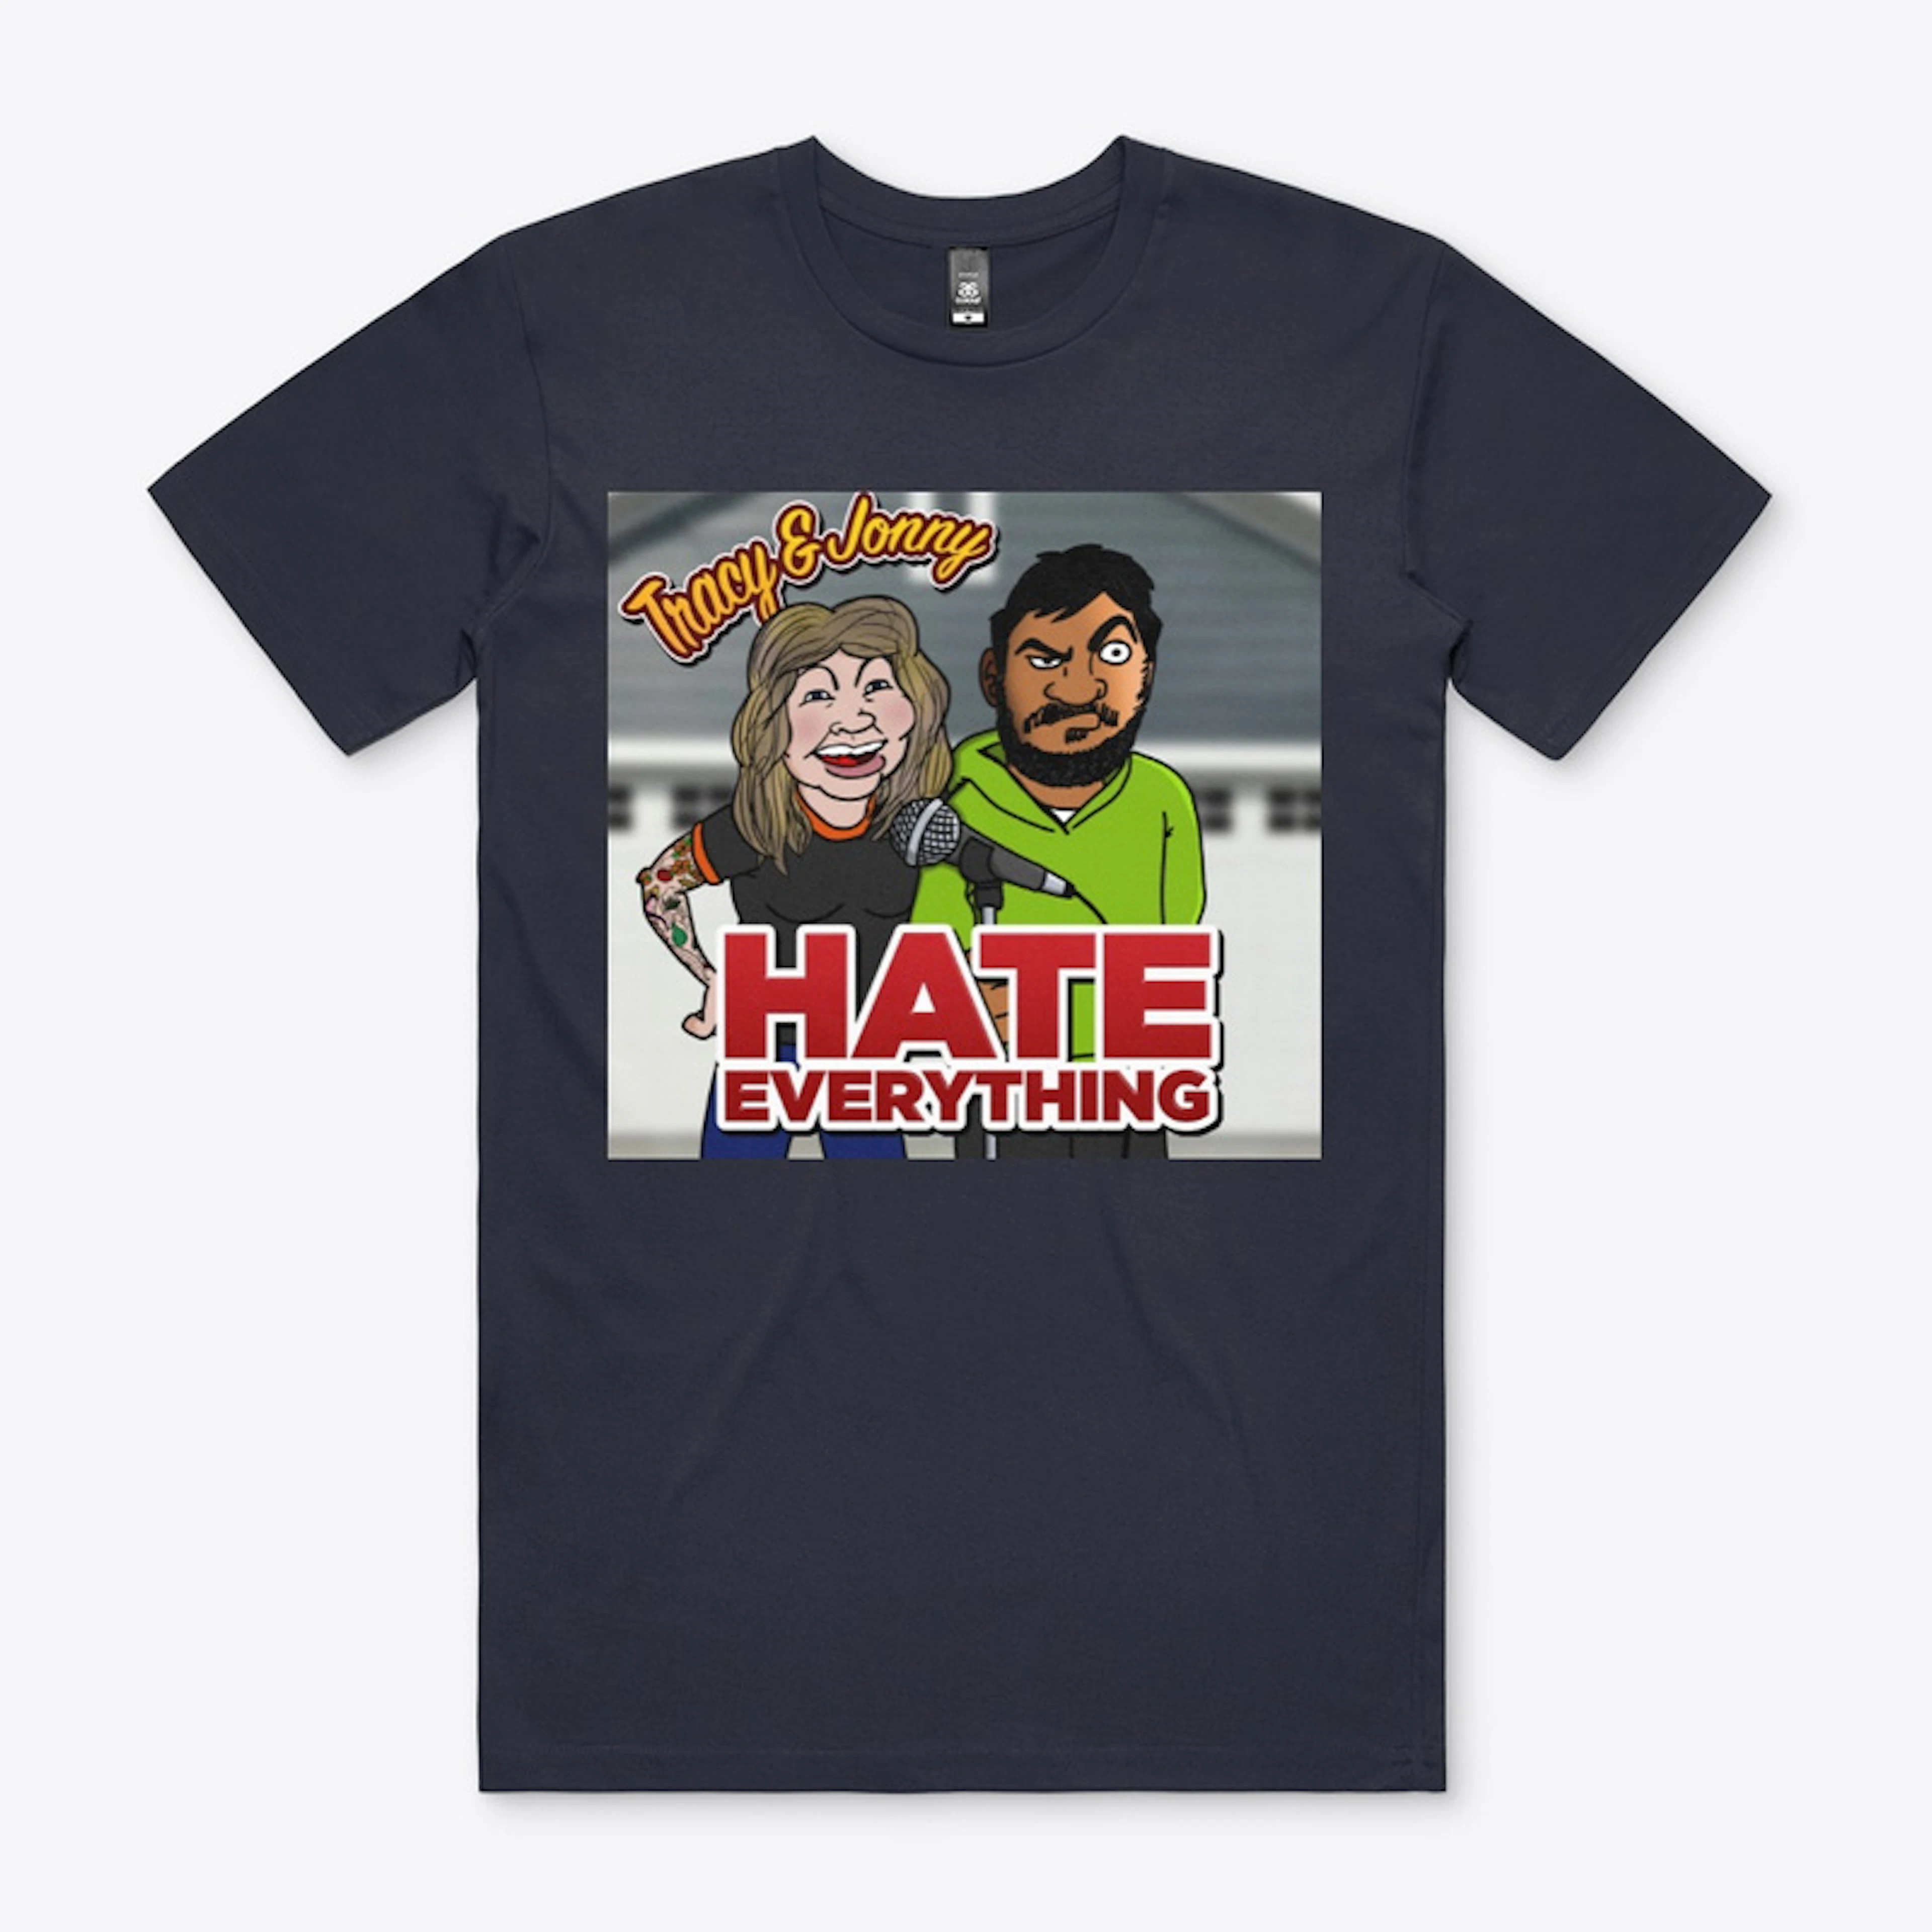 Hate Everything - Tee